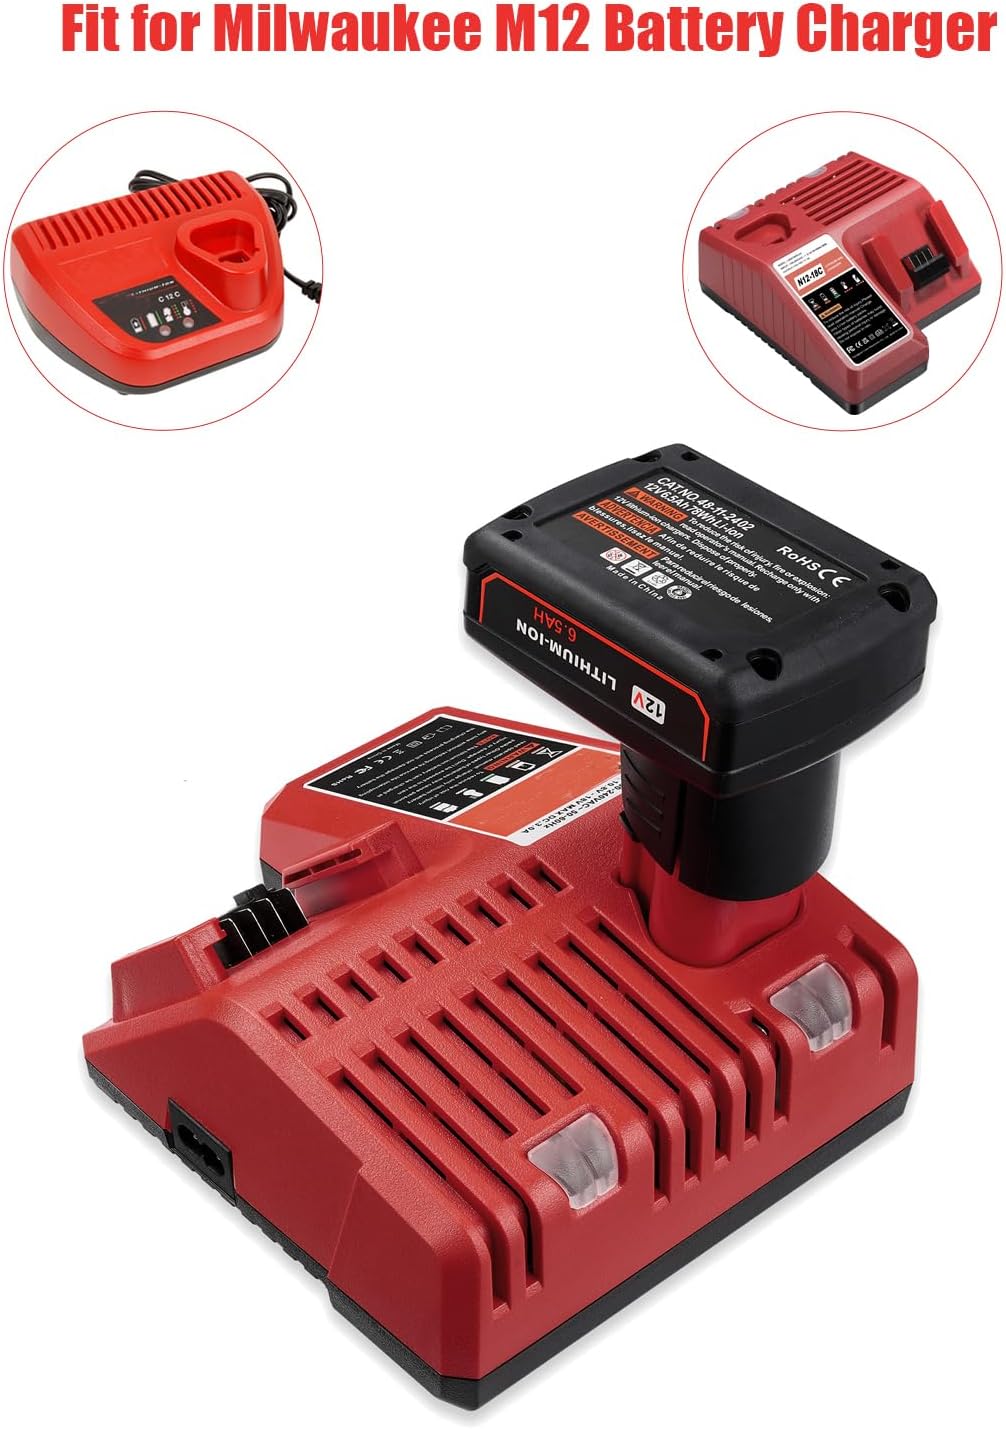 2 Packs JYJZPB 6.5Ah 12V Lithium Cordless Tools Battery Compatible for Milwaukee M12 Battery 48-11-2401 48-11-2412 48-11-2411 48-11-2420 48-11-2410